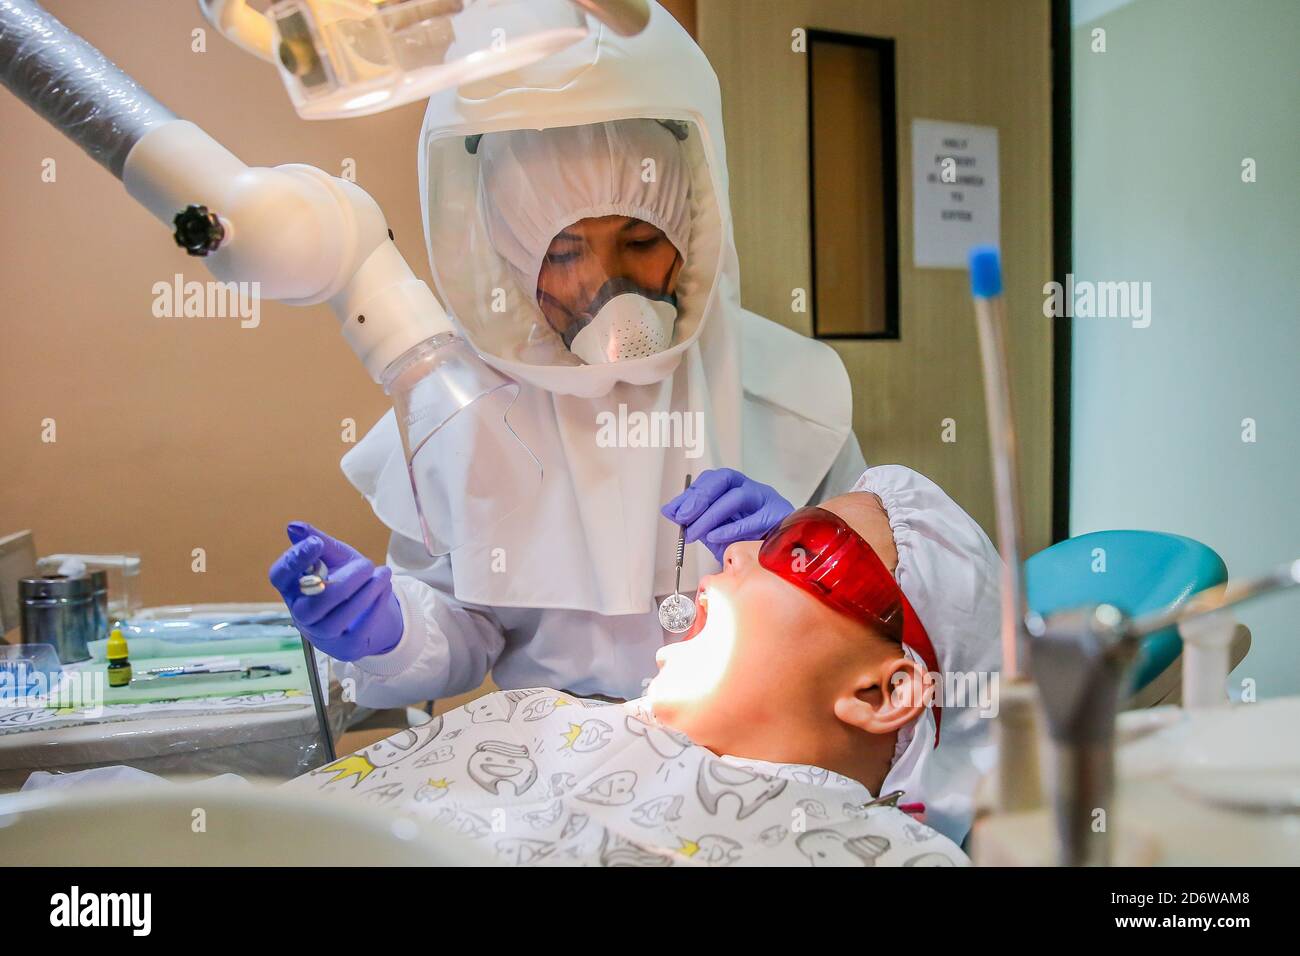 Manila, Philippines. 19th Oct, 2020. Dr. Maureen P. Ines-Manzano, a dentist, performs a dental brace adjustment on her patient while wearing a powered air-purifying respirator (PAPR) suit inside her clinic in Manila, the Philippines, on Oct. 19, 2020. Patients of Dr. Manzano has dubbed her the 'astronaut dentist' because of her resemblance to a spacewoman while wearing her PAPR suit to protect her patients and herself from the COVID-19 disease. Credit: Rouelle Umali/Xinhua/Alamy Live News Stock Photo